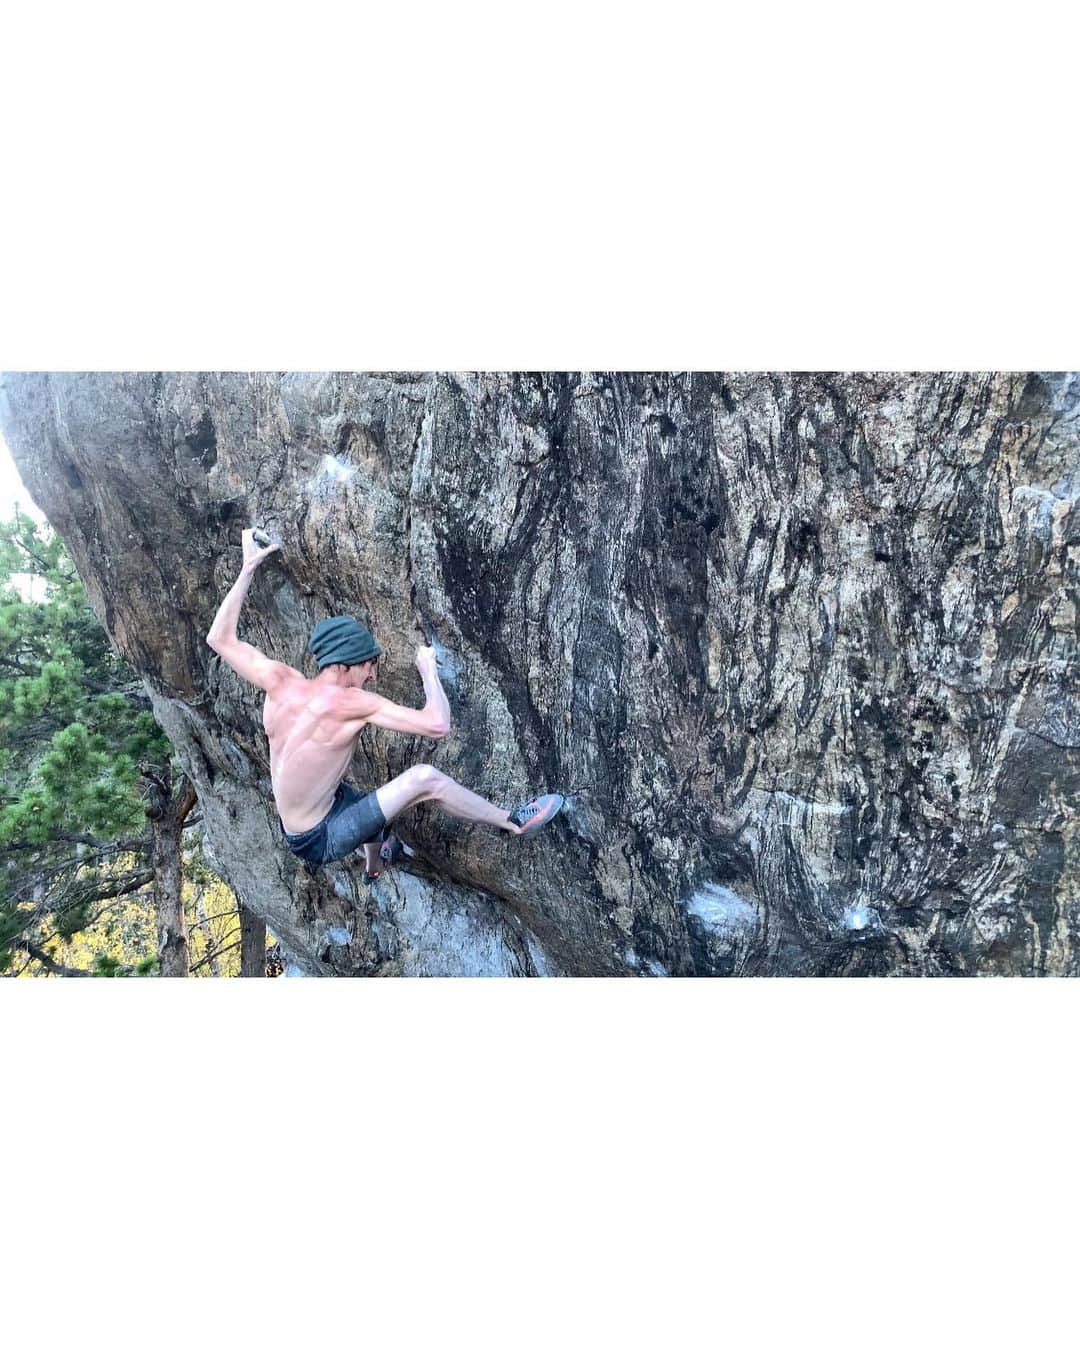 デイブ・グラハムさんのインスタグラム写真 - (デイブ・グラハムInstagram)「Hypnotized Minds [8C+] 💎✔️💎 It’s pretty thrilling news to share that on Tuesday I finally climbed this incredible problem first ascended by  legend @dawoods89 🎉🎉🎉 I have been trying this problem seriously for the past 7 years, but remember my first days in the park as a young lad staring up at this line, already entranced 🌀The saga really starts with me falling off the last move twice, deep into the winter season, just before rupturing my A2 pulley in Mexico back in 2013 💔 Fast forward two years when I was finally all healed for crimping and I broke off a key left foot for the crux move, reducing my highpoint and beta to ashes; It felt like was starting from scratch 😞 I was still obsessed. I dedicated every Fall and Spring season to sieging Hypno, abandoning any other climbing goals in hope that I could rise above and conquer this sequence, yet amidst unpredictable sub-alpine conditions, it wasn’t so simple. Most of my friends abandoned my effort, and I started regularly climbing alone on the boulder. Struggling to see my errors by myself, it became a new type of challenge. The pattern of shoveling the boulder out between weekly storms and the long solo drives started to become synonymous with the idea of making attempts 😵 Until this October. First day went really well, I realized my new @fiveten_official Dragons were game changing on both crux moves allowing me to get the crack pocket correctly from the start, and give me a fair sticking the high left pinch from the ground. Day 2 I came super close to sticking the pinch, I felt stronger physically then I ever had, and more calm in the mind. Day 3 was 65 at the parking, pretty warm for my taste, but as a snow storm was rolling in it seemed smart to give at least a few tries. First go I fell off the last move (can’t wait to share that 😂), second go at the crux, and third try, I SENT 🤯 IG won’t let me elaborate more this post but I can’t wait to share the entire story with everyone, and the send!!! Thanks for the support from my homies who believed in me (you know who you are amigos 🙌🏻) and @alizee_dufraisse for reminding me I can actually do what I set my mind to 💞 time to enjoy the FREEDOM 👐🏻!!!!」10月12日 4時51分 - dave_graham_